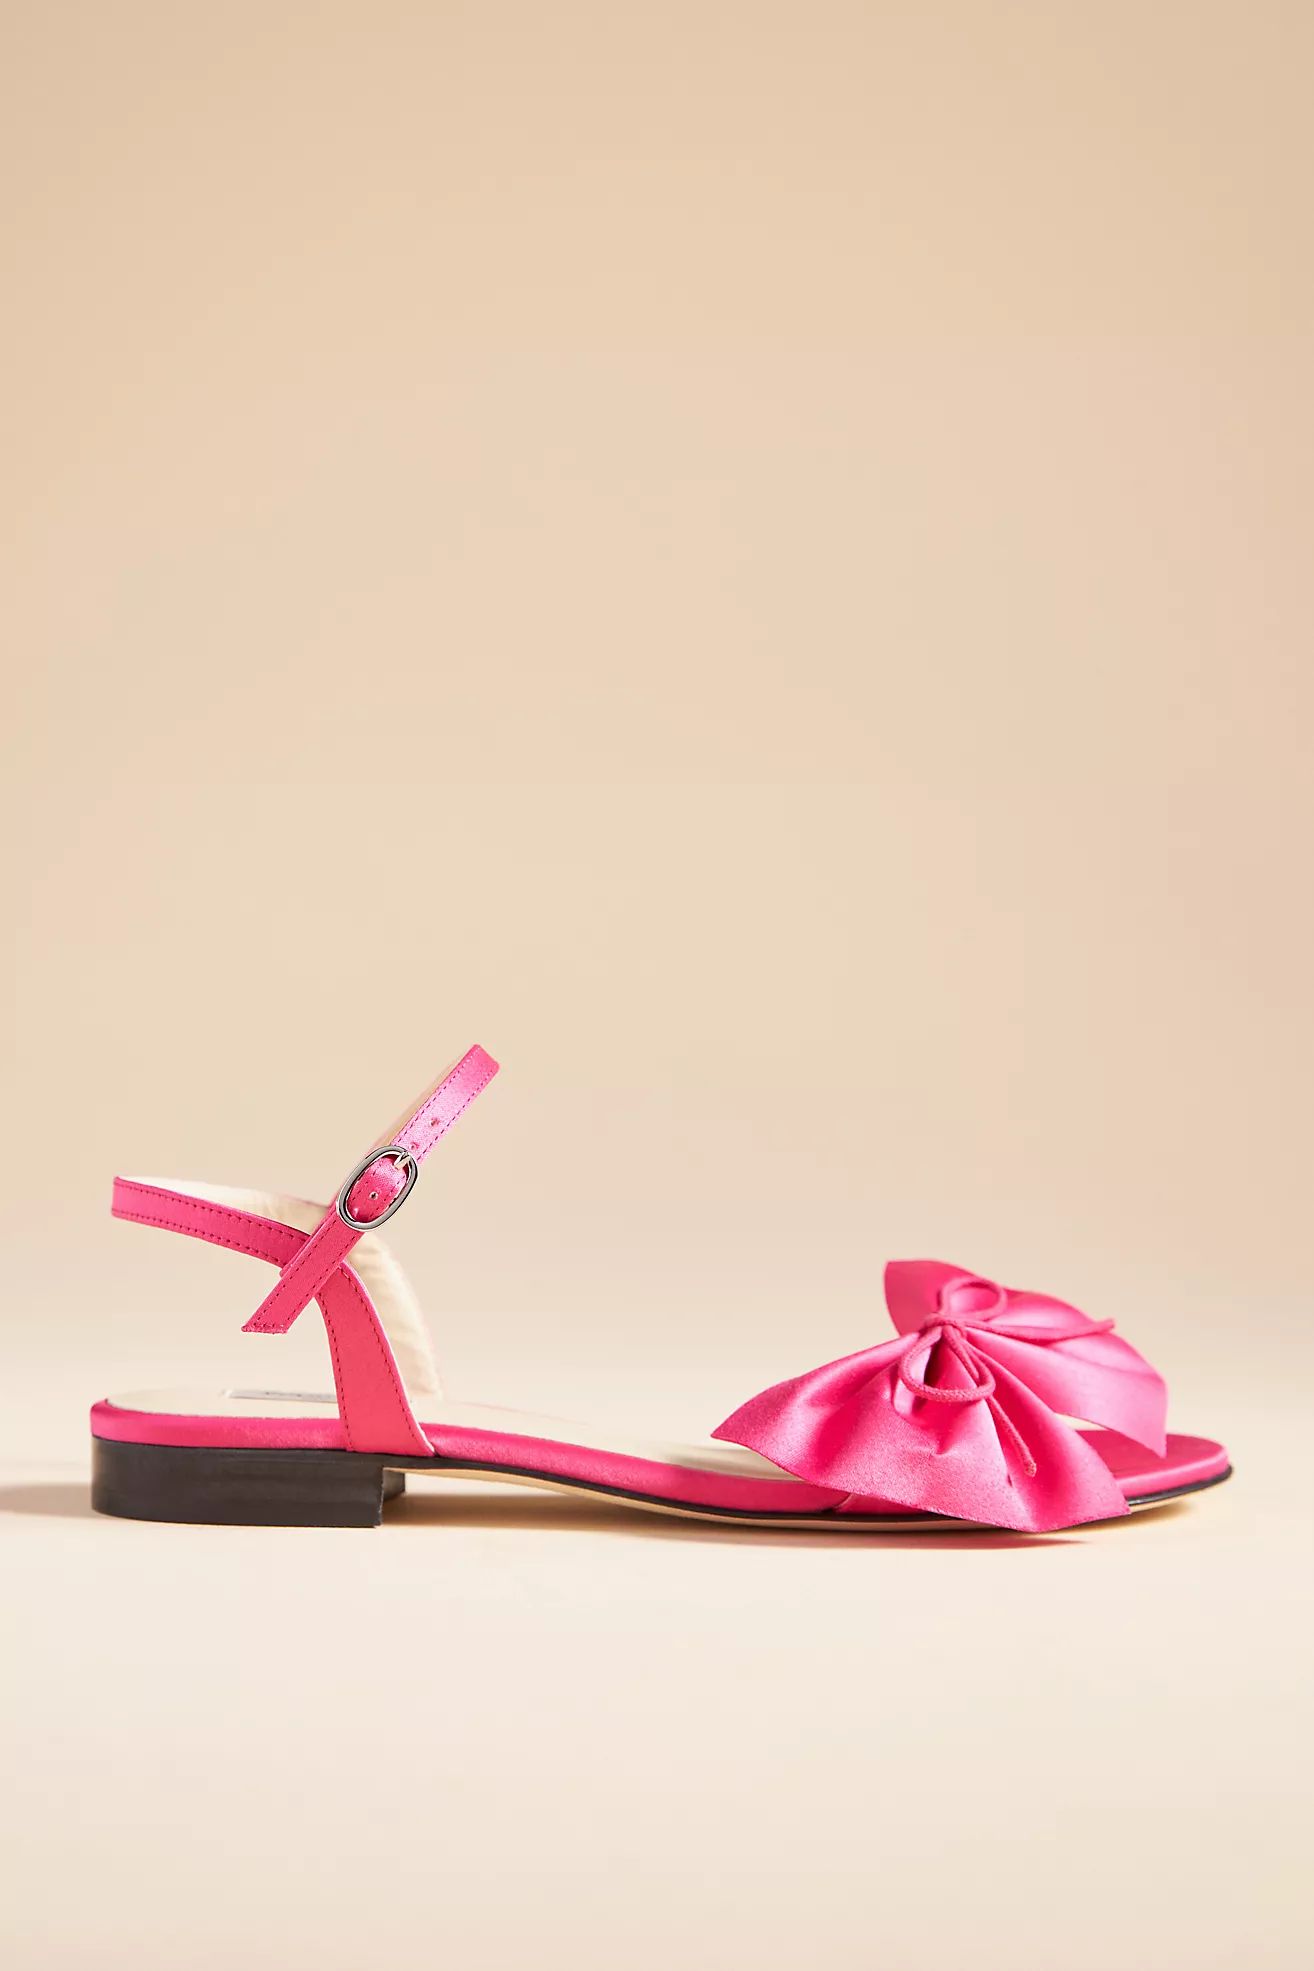 Repetto Janice Bow Sandals | Anthropologie (US)